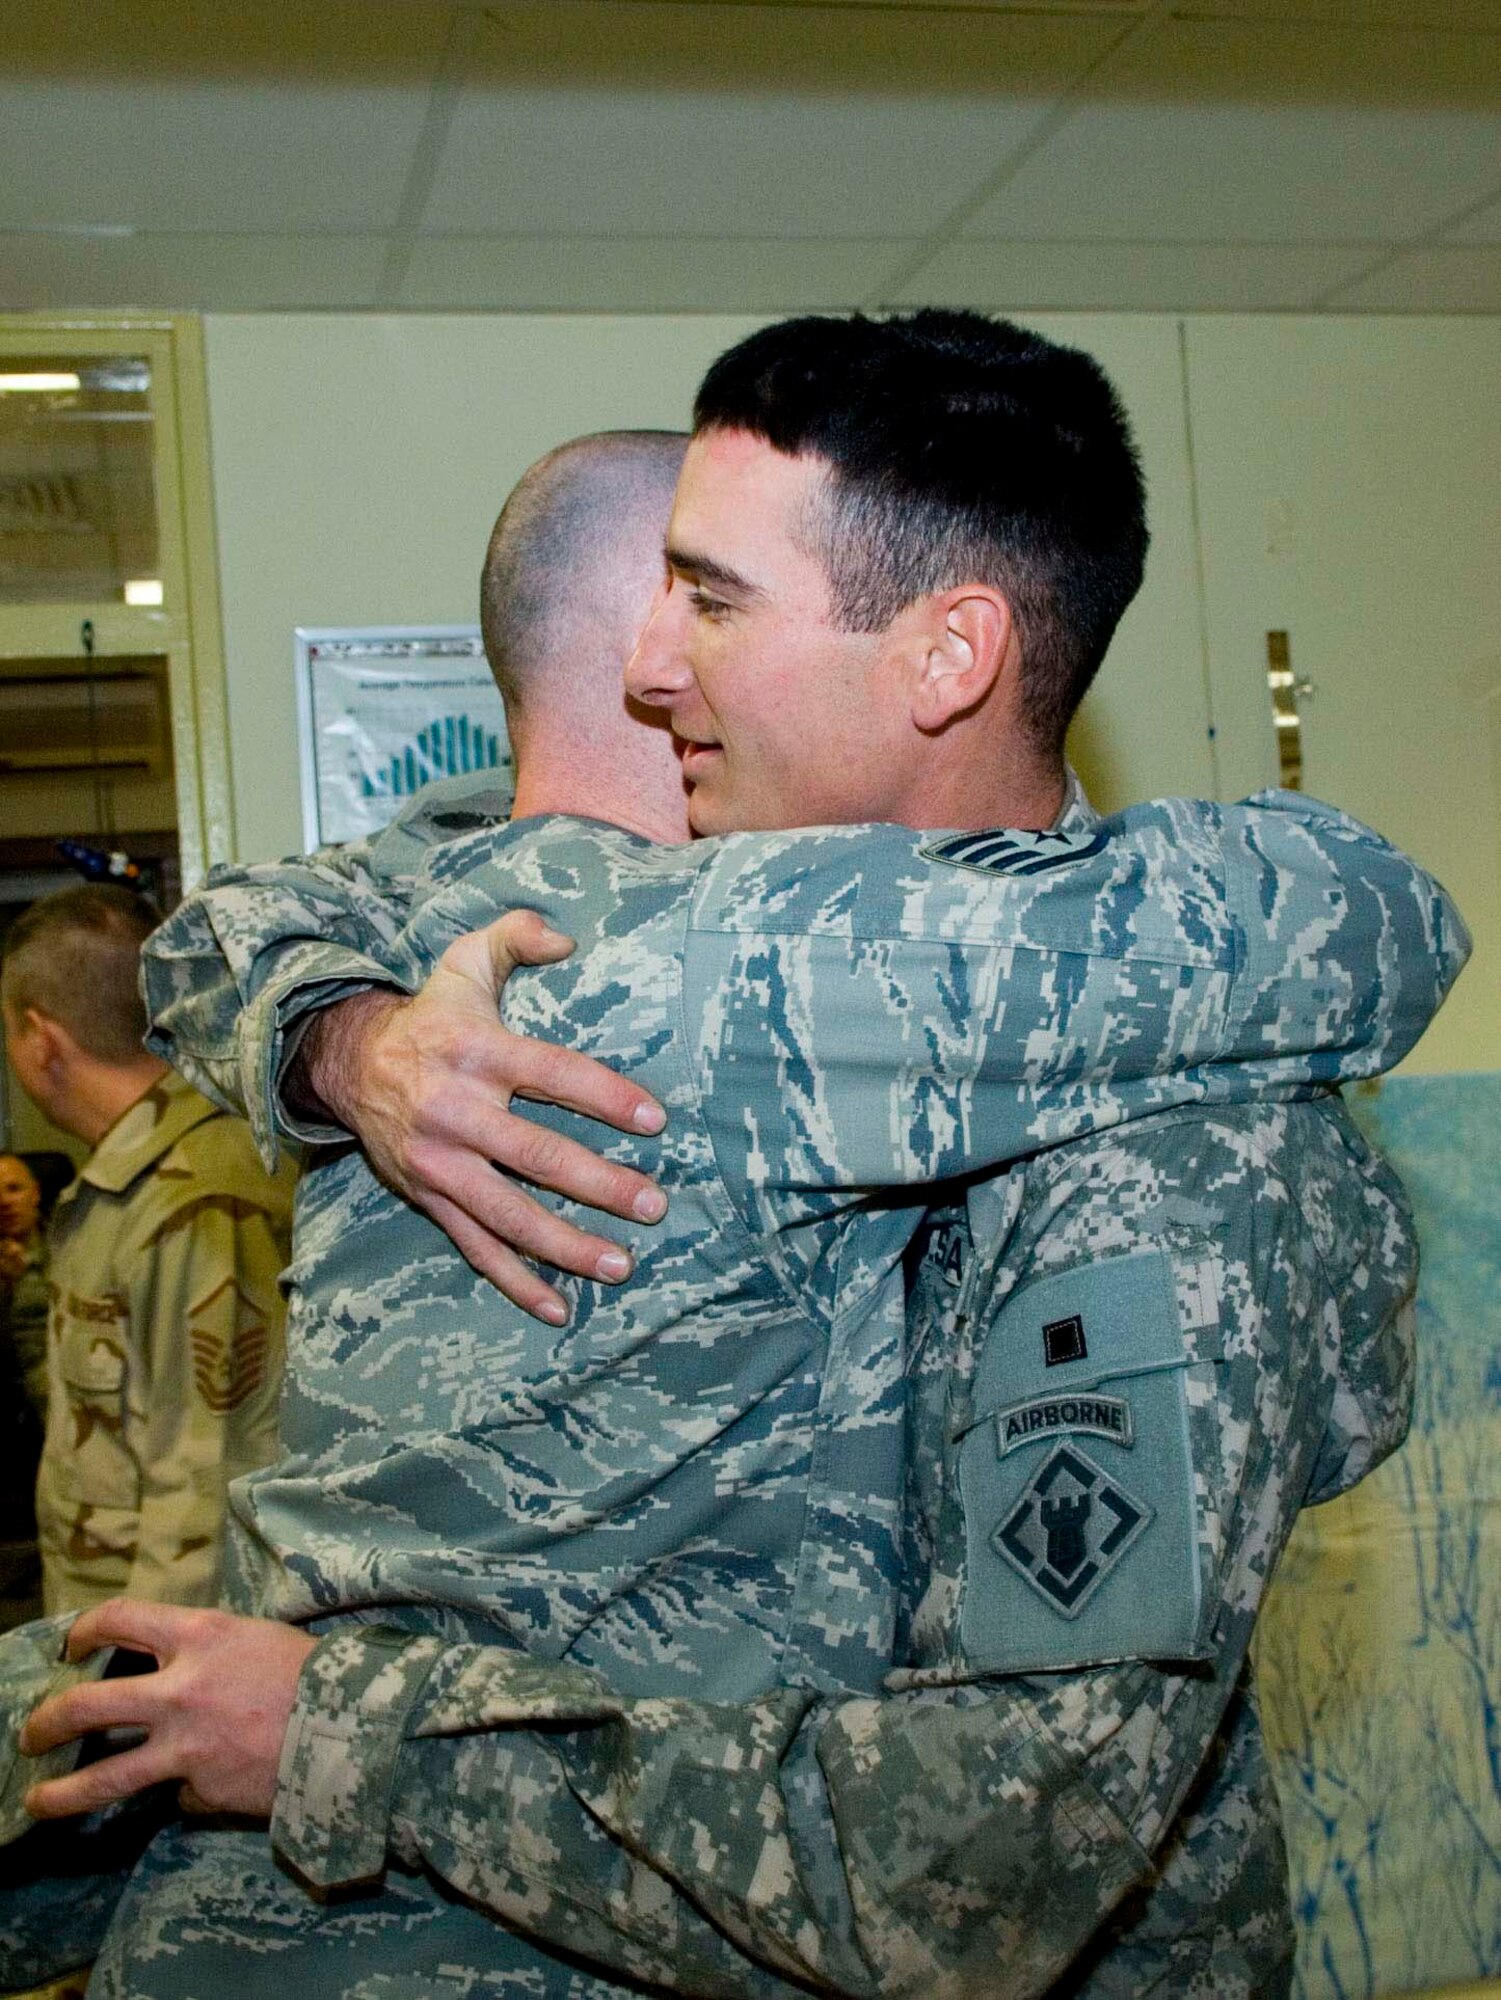 BALAD AIR BASE, Iraq -- Staff Sgt. Brad Boatman, right, and his brother Army Sgt. Matt Boatman, greet each other here, Jan.  The brothers have not seen one another in three years. Sergeant Brad Boatman, who is deployed from Fairchild Air Force Base, Wash., is a 332nd Expeditionary Operations Support Squadron weather forecaster.  His younger brother, who is deployed from Fort Campbell, Ky., is a 326th Combat Engineers noncommissioned officer in charge of a gun truck.  The brothers are both from Amarillo, Texas. (U.S. Air Force photo/Staff Sgt. Travis Edwards)